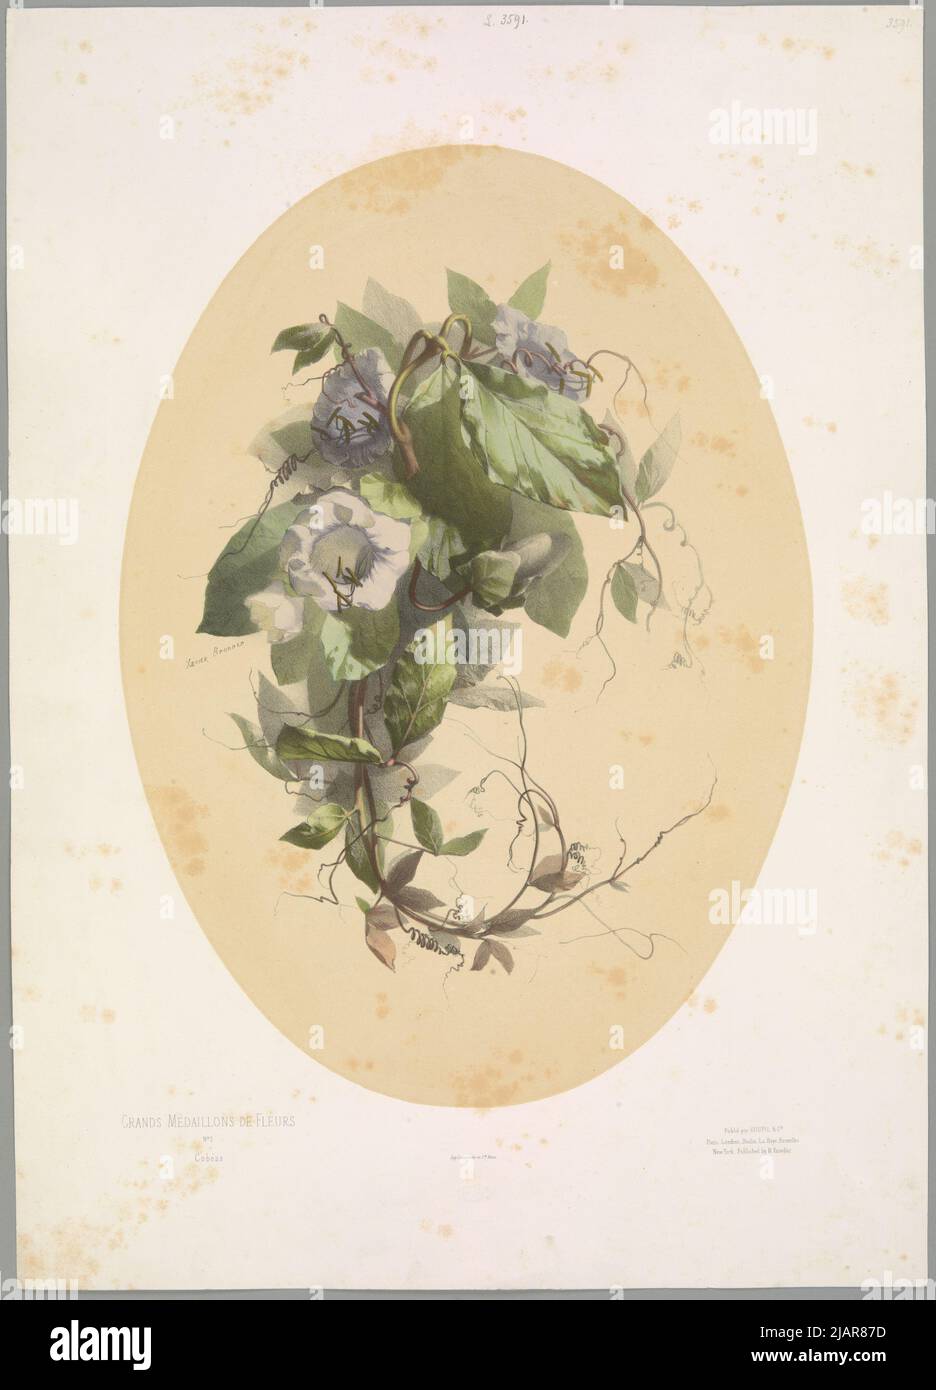 Cobéas / Kobee Ploty  pl. 2. From the Great Medalions of Flowers series Bronner, Xavier (1840 1920), imp. Lemercier & Cie, Goupil & Cie, Knoedler, Michael (1823 1878) Stock Photo